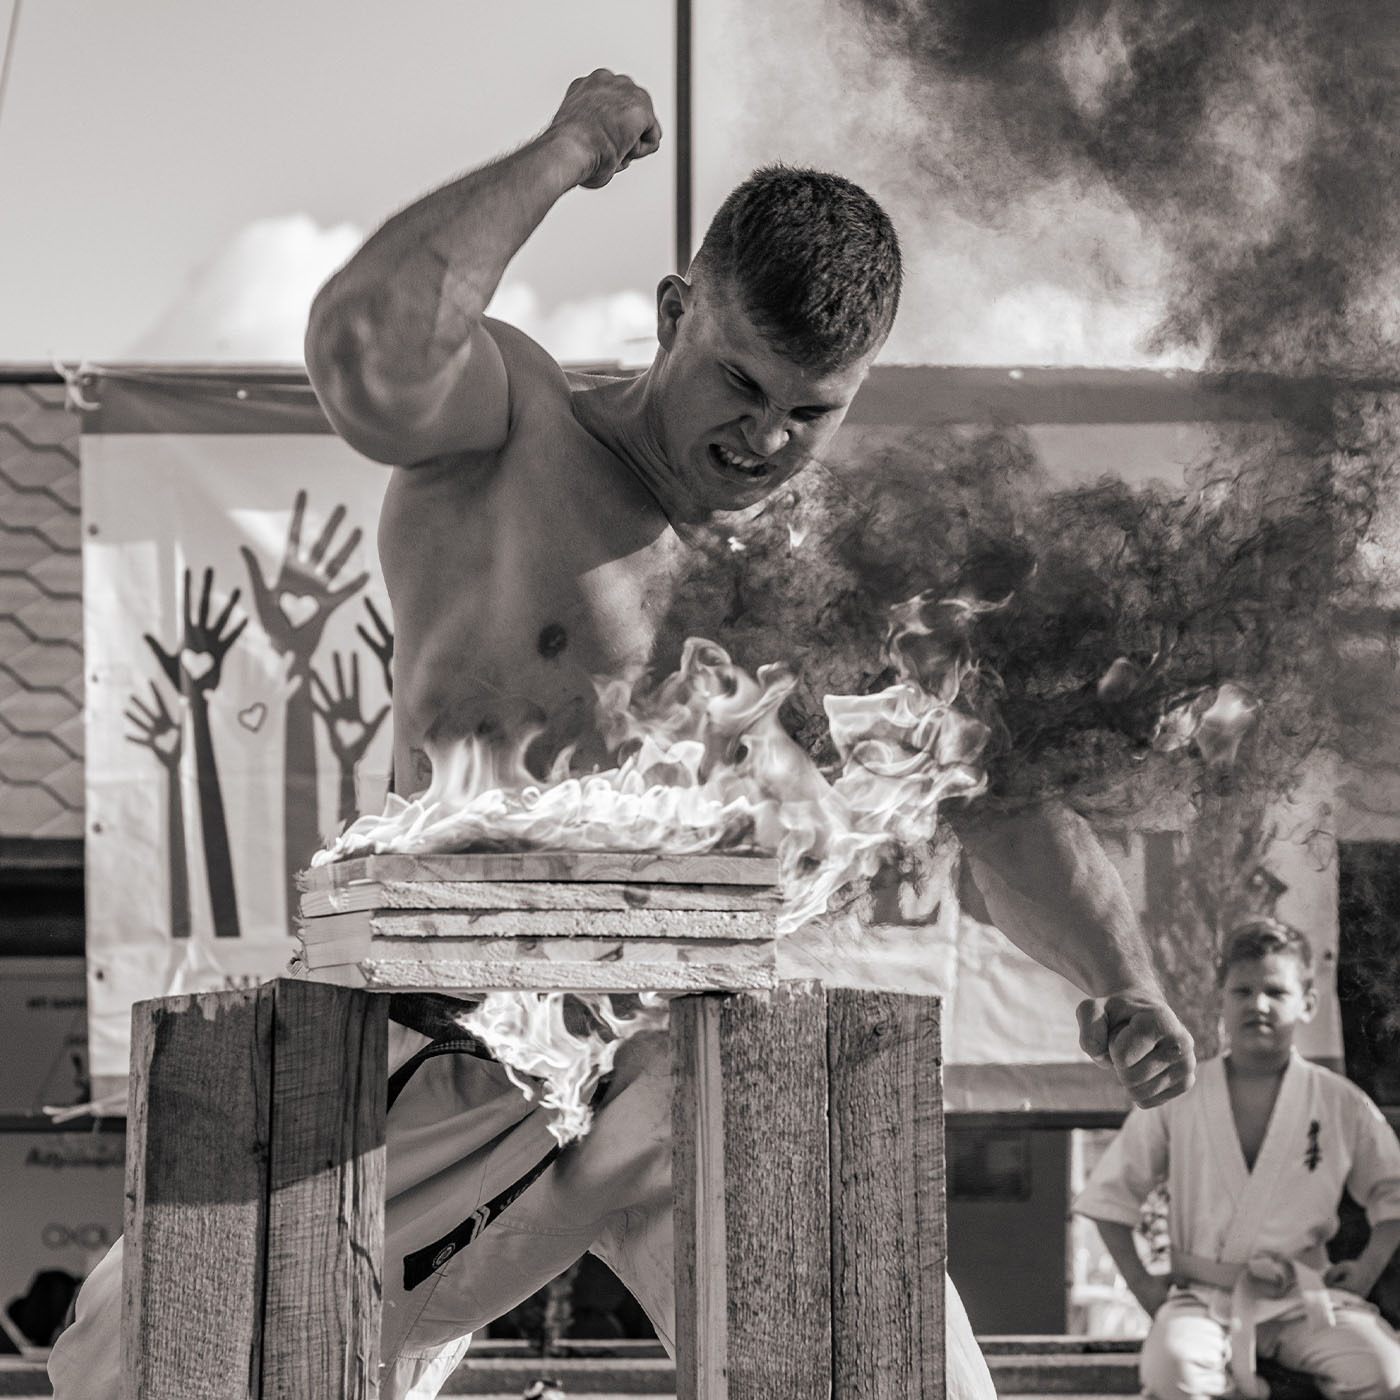 Burning Wood With Weightlifter